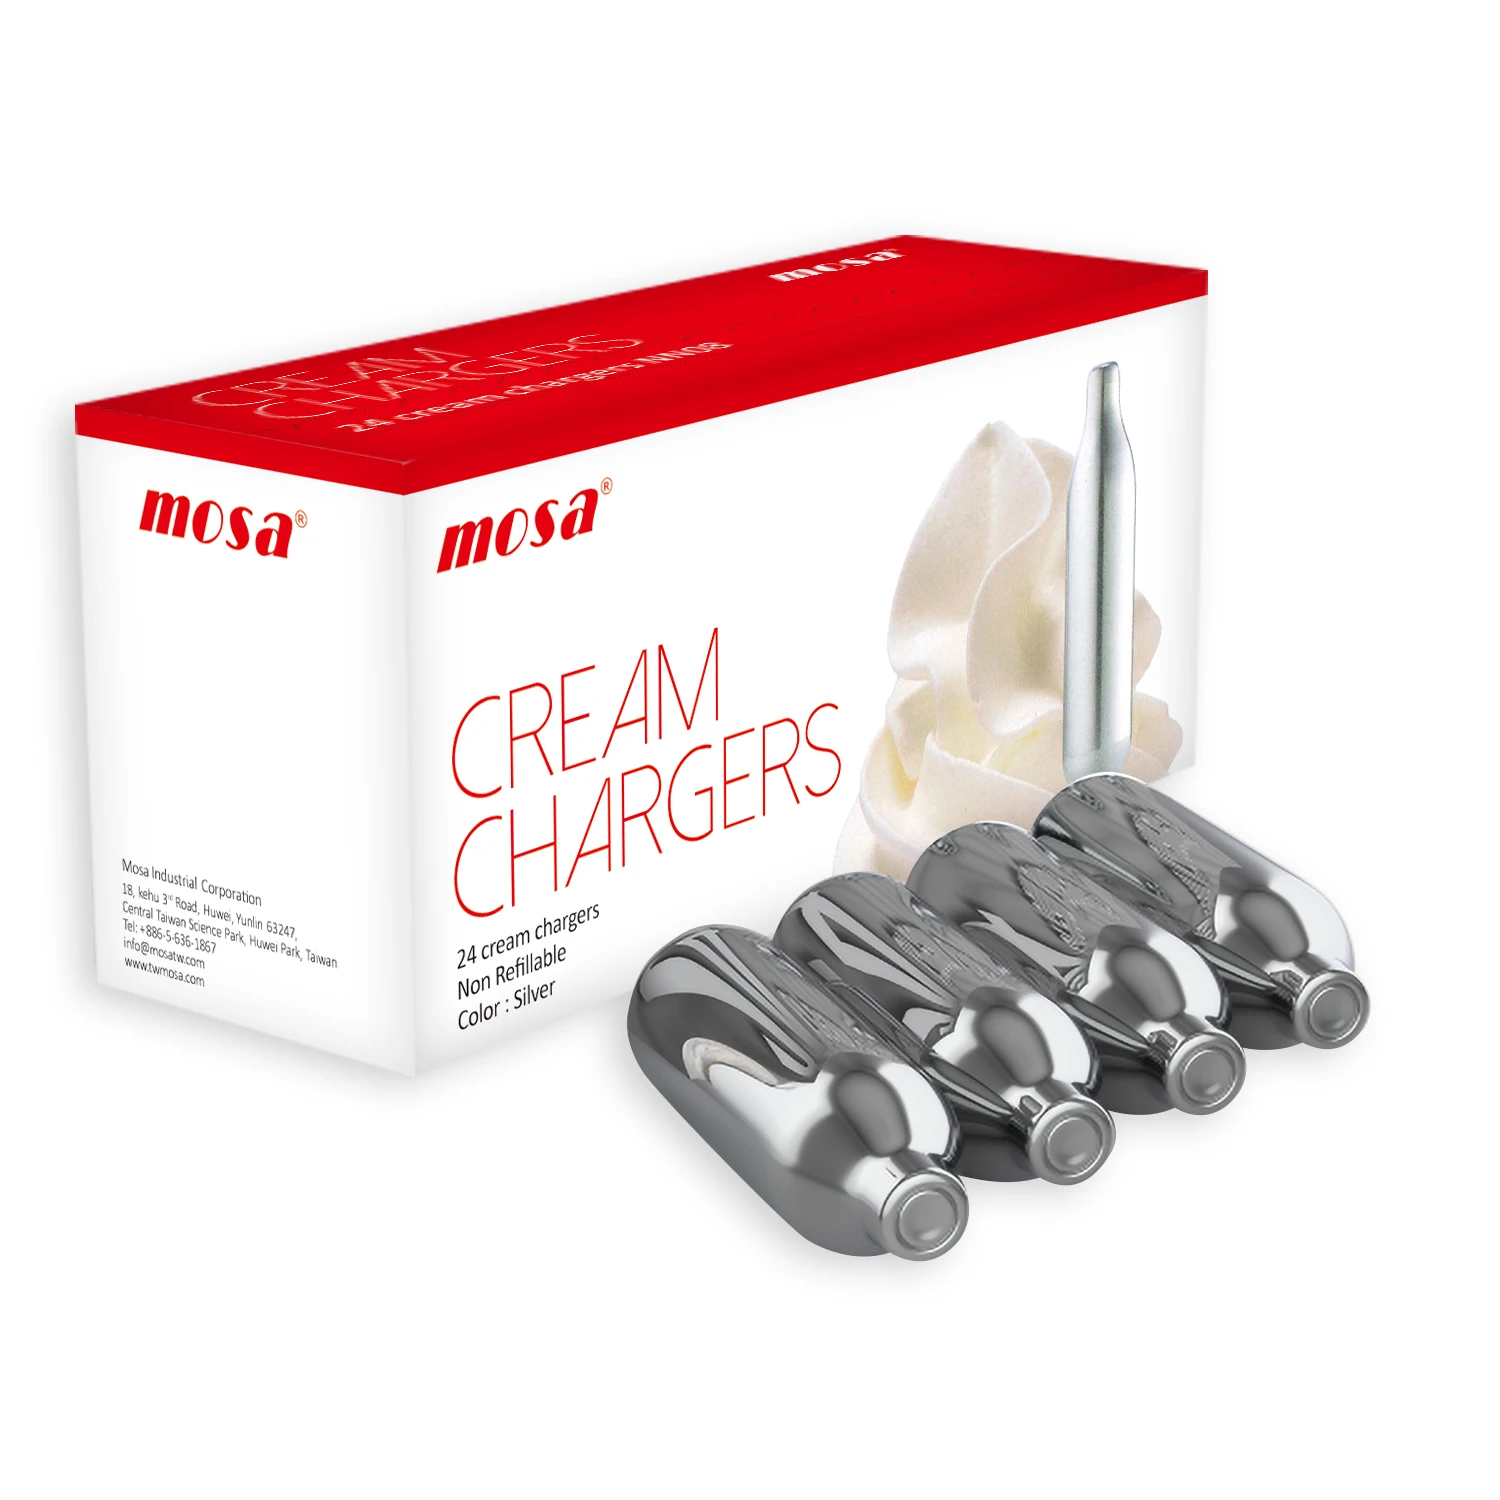 Nitrous Oxide 2 Canisters 8g Mosa Cream Chargers 